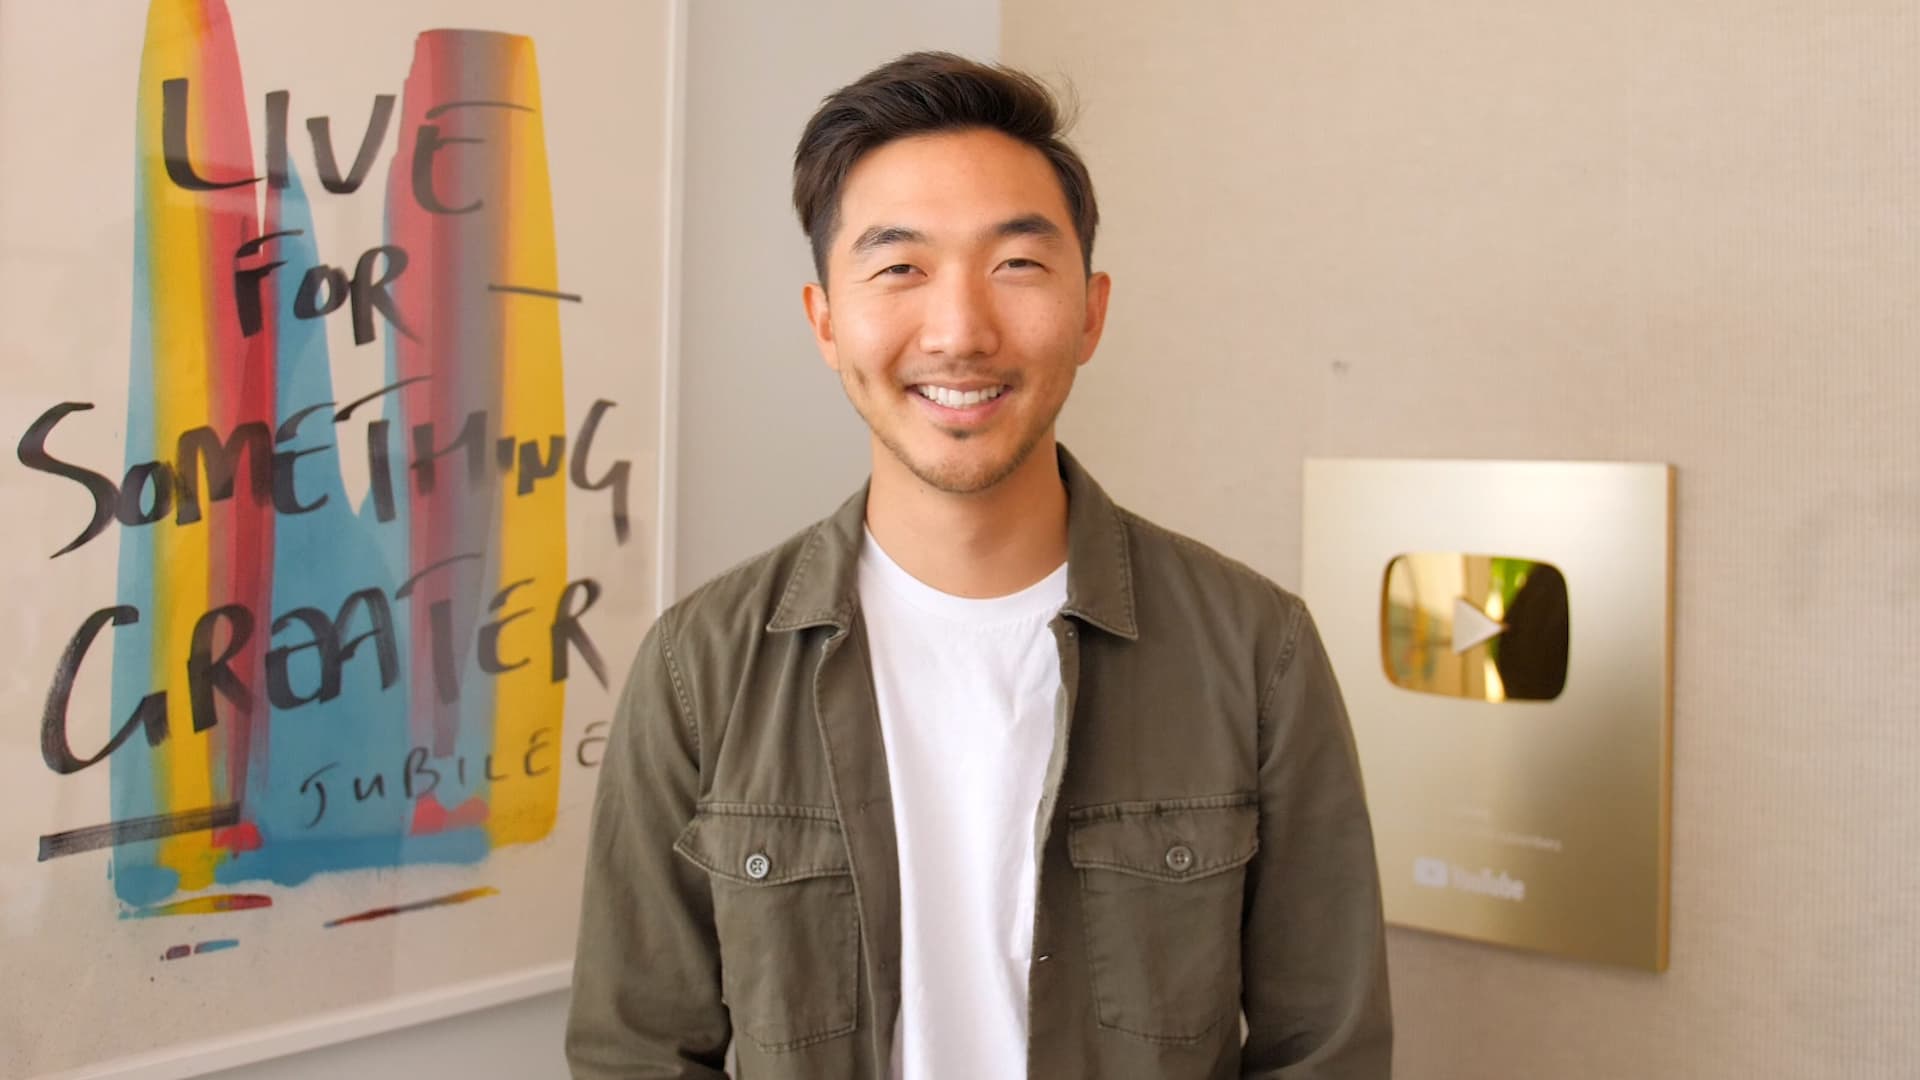 Jason Y. Lee, 33, is the founder and CEO of Jubilee Media in L.A.